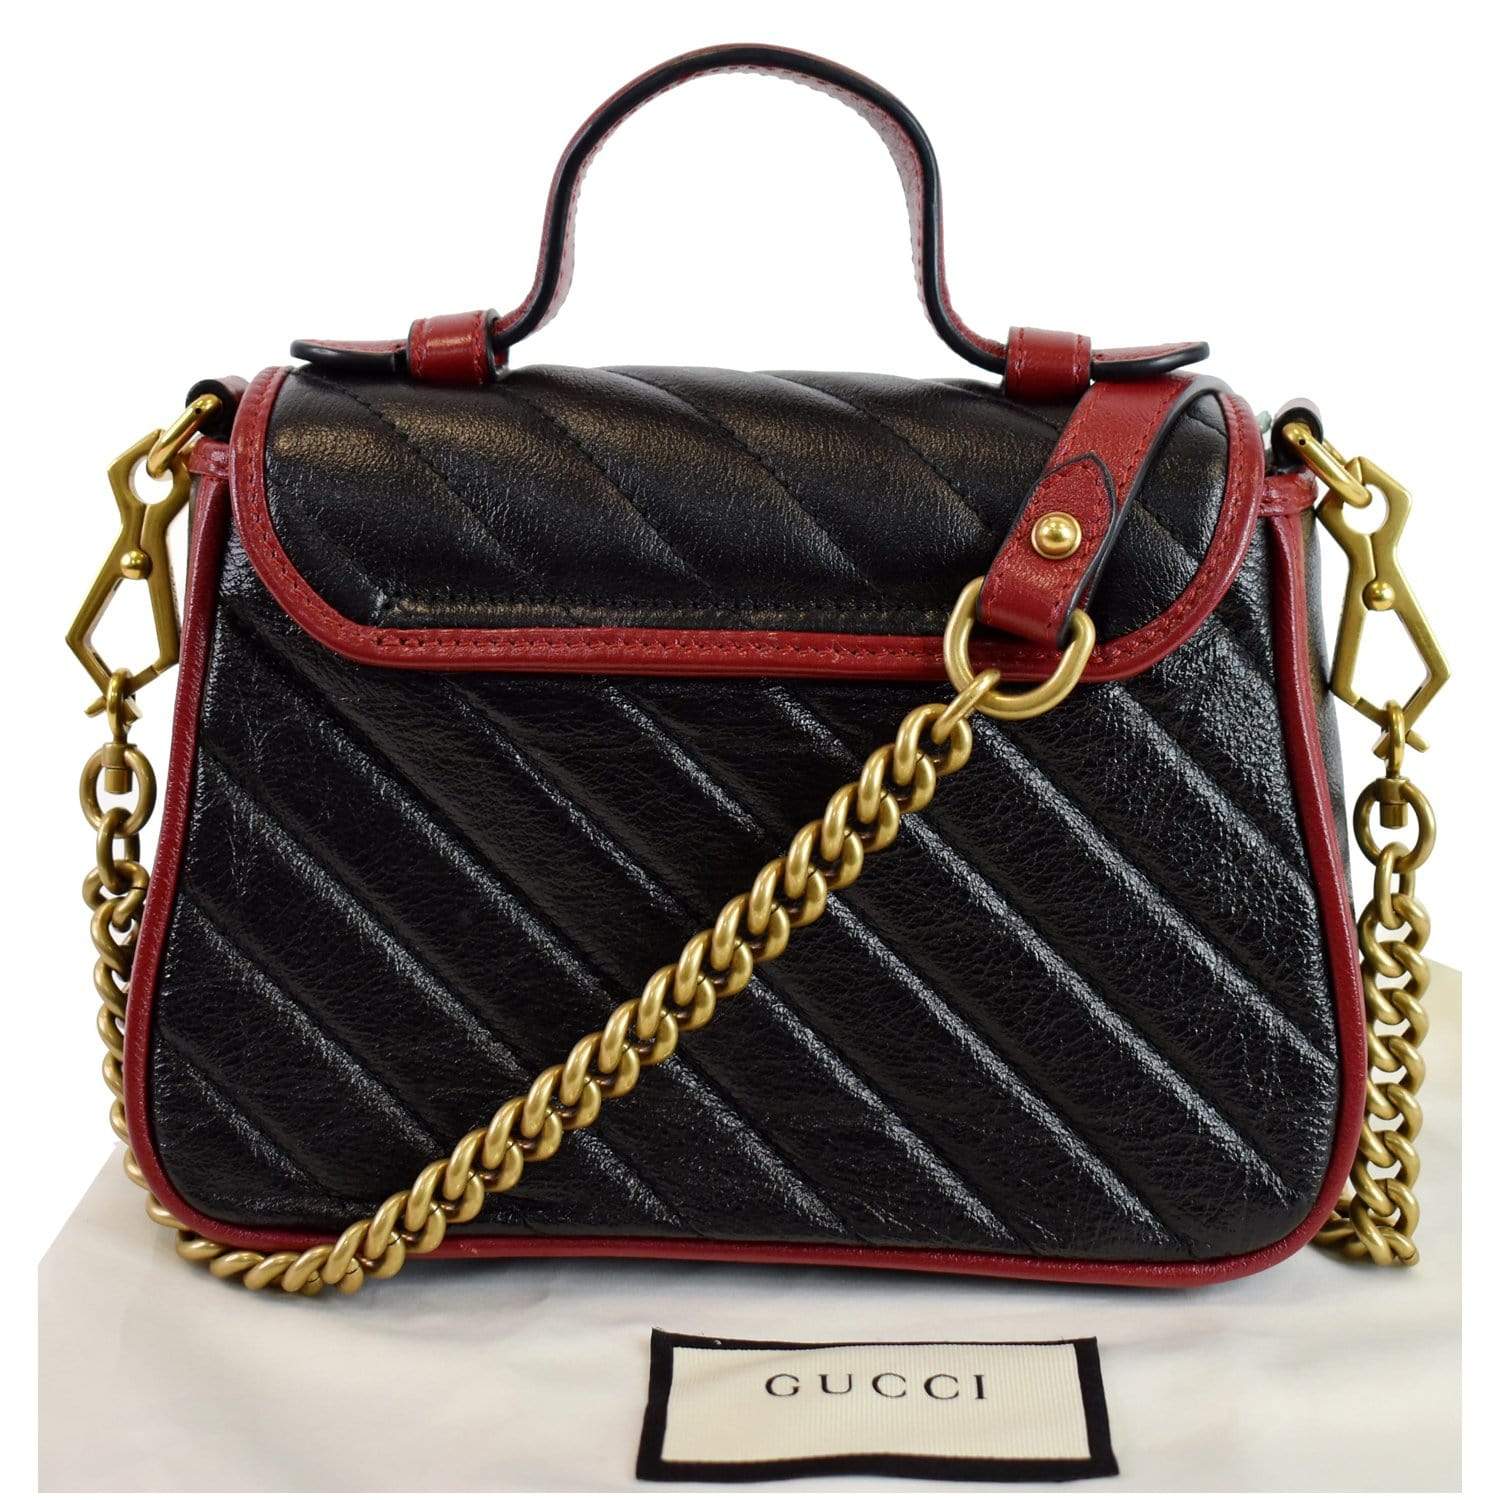 Gucci 'GG Marmont Small' Shoulder Bag in Red